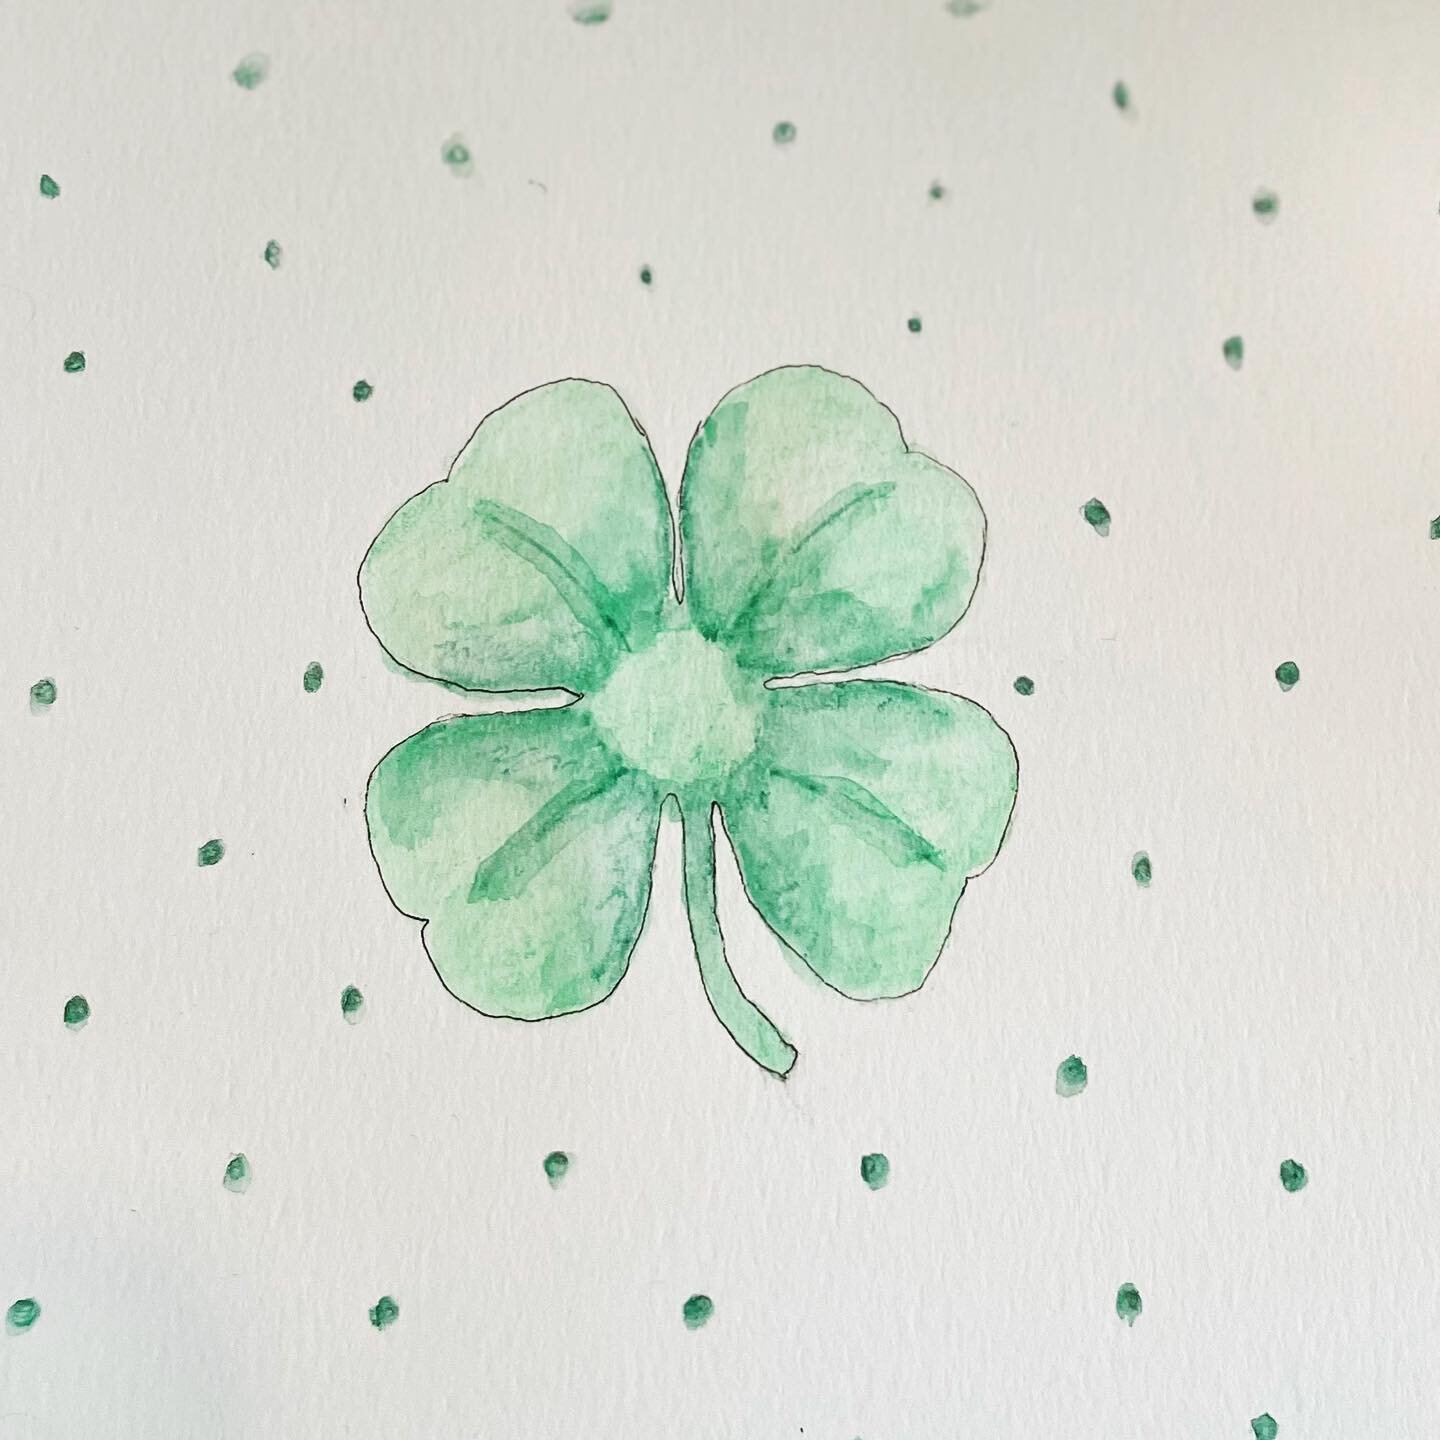 Happy Saint Patrick&rsquo;s Day 🍀
Enjoy 25% off your order with code LUCKY
#ACK #nantucket #thegraylady #happysaintpatricksday #lucky